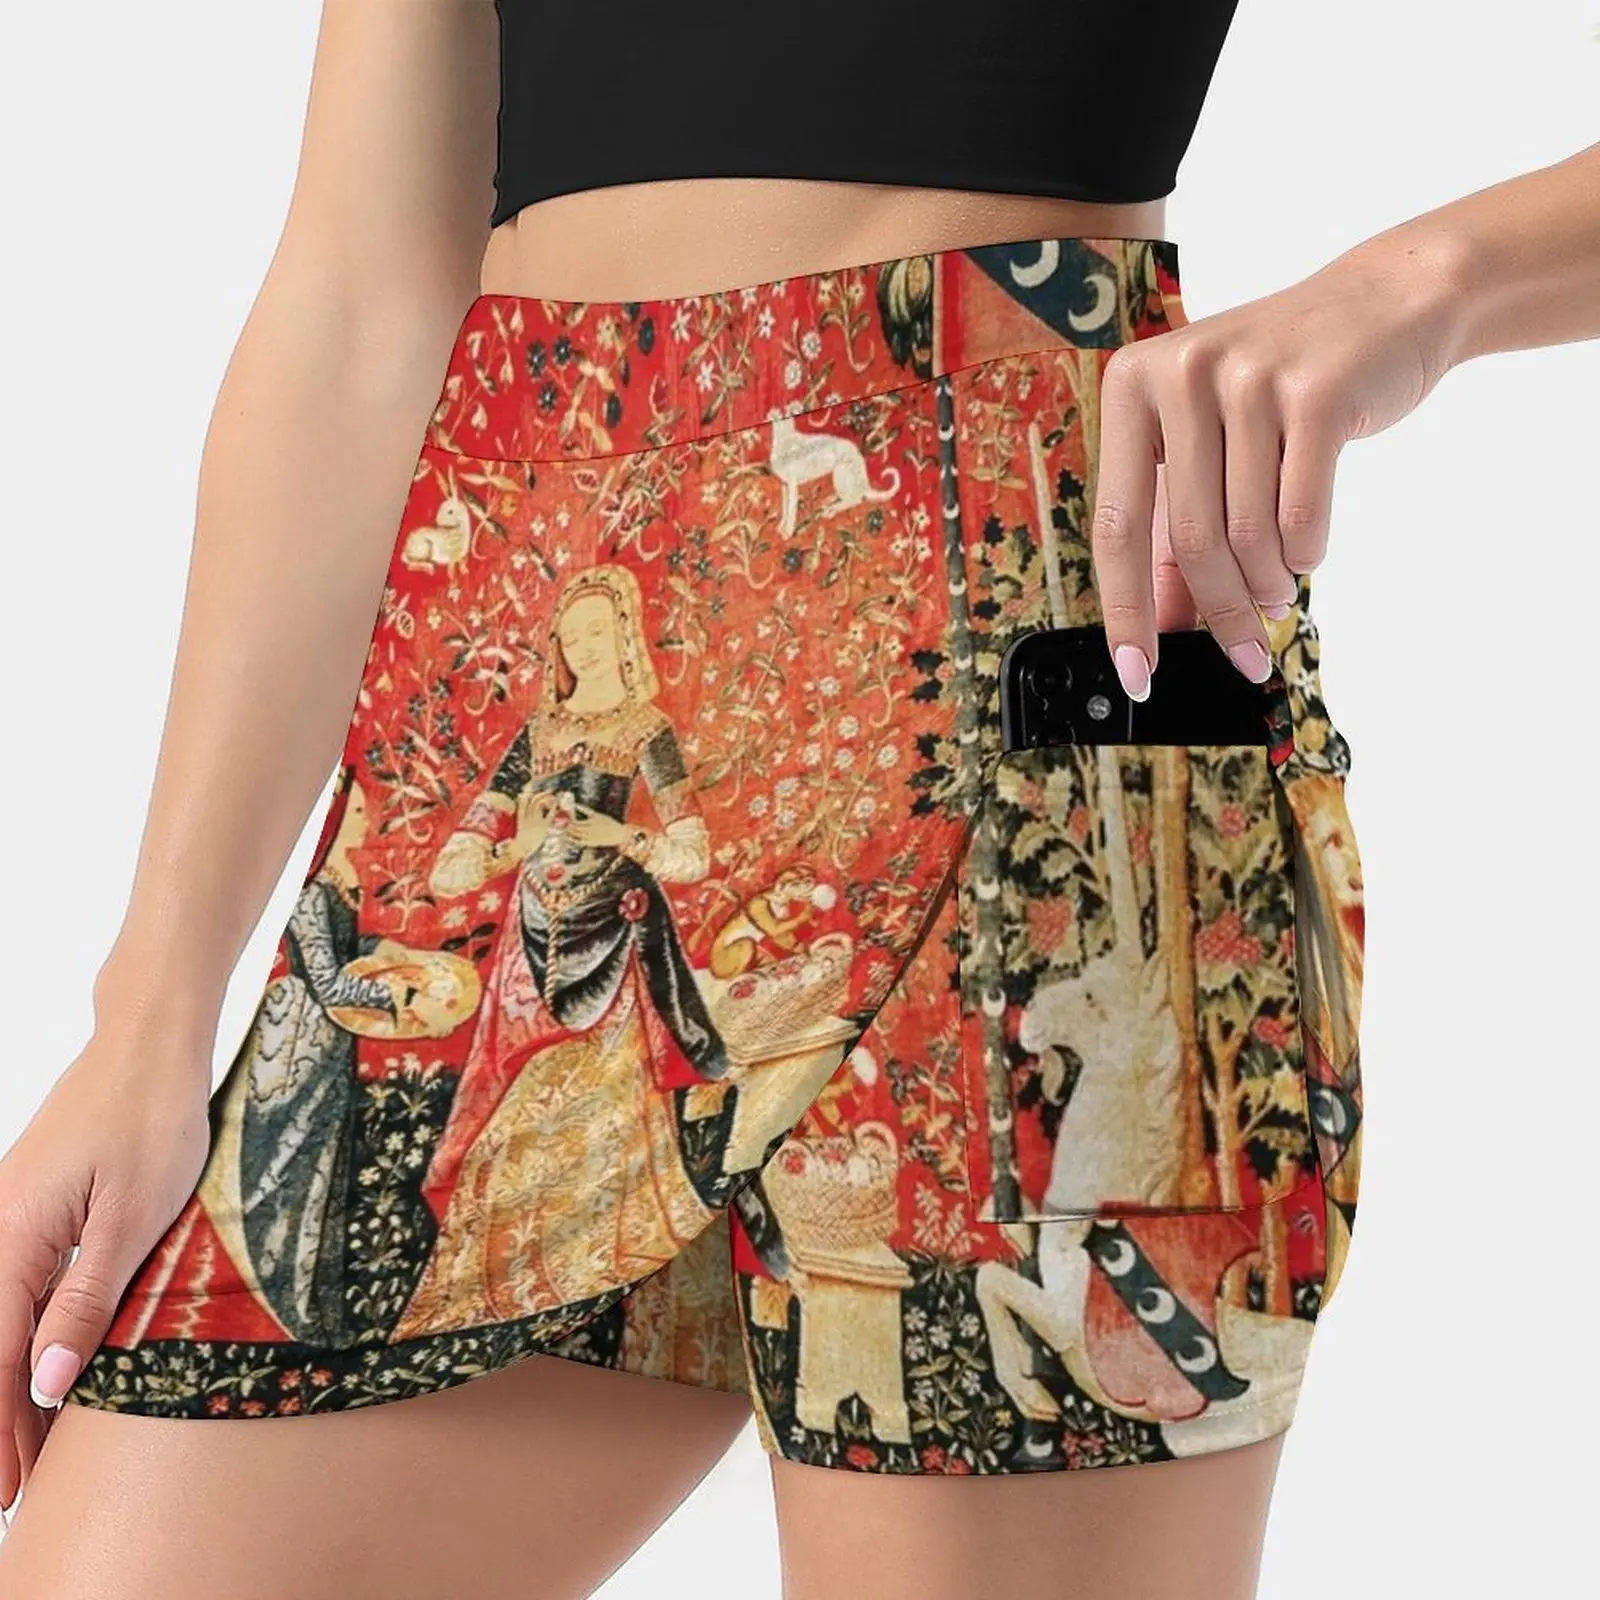 

Lady And Unicorn , Smell , Lion , Fantasy Flowers , Animals Women's skirt Mini Skirts A Line Skirt With Hide Pocket Fantasy